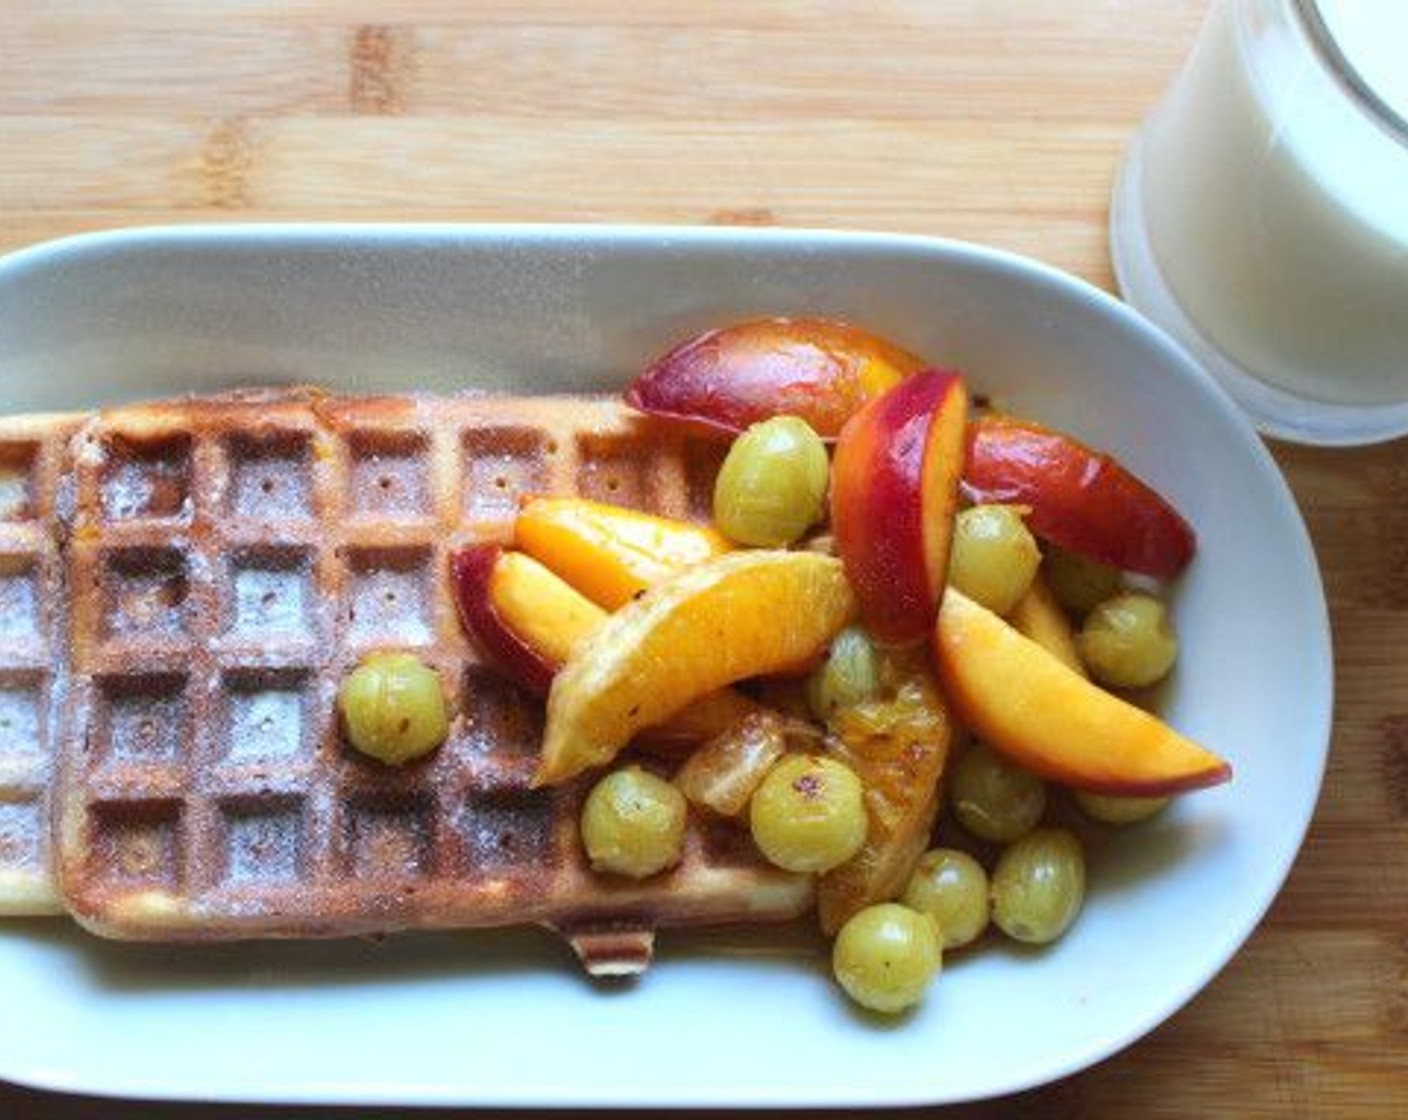 step 7 Serve the waffles with the caramelized fruits and syrup of your choice.